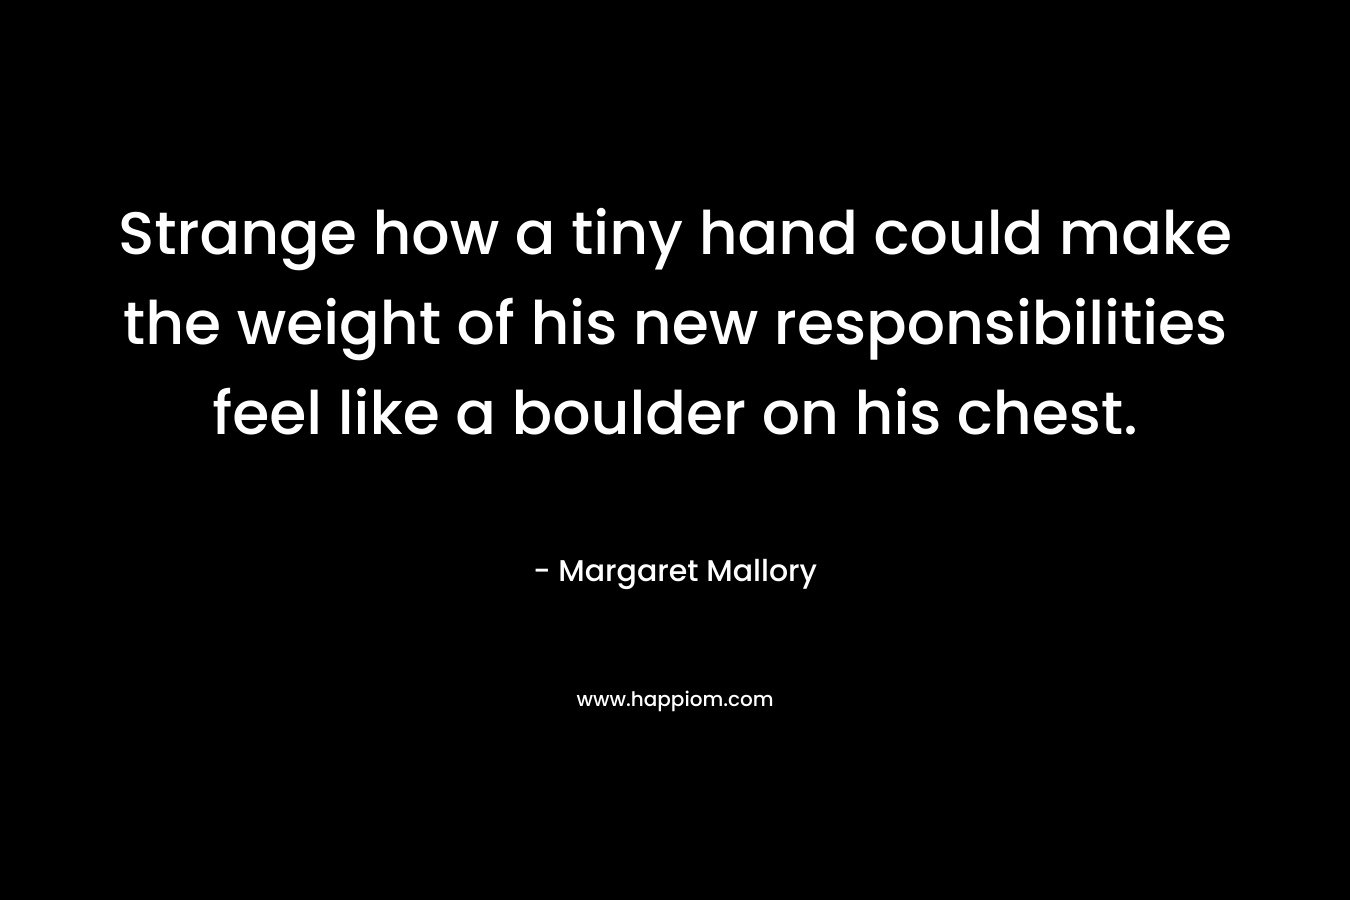 Strange how a tiny hand could make the weight of his new responsibilities feel like a boulder on his chest. – Margaret Mallory